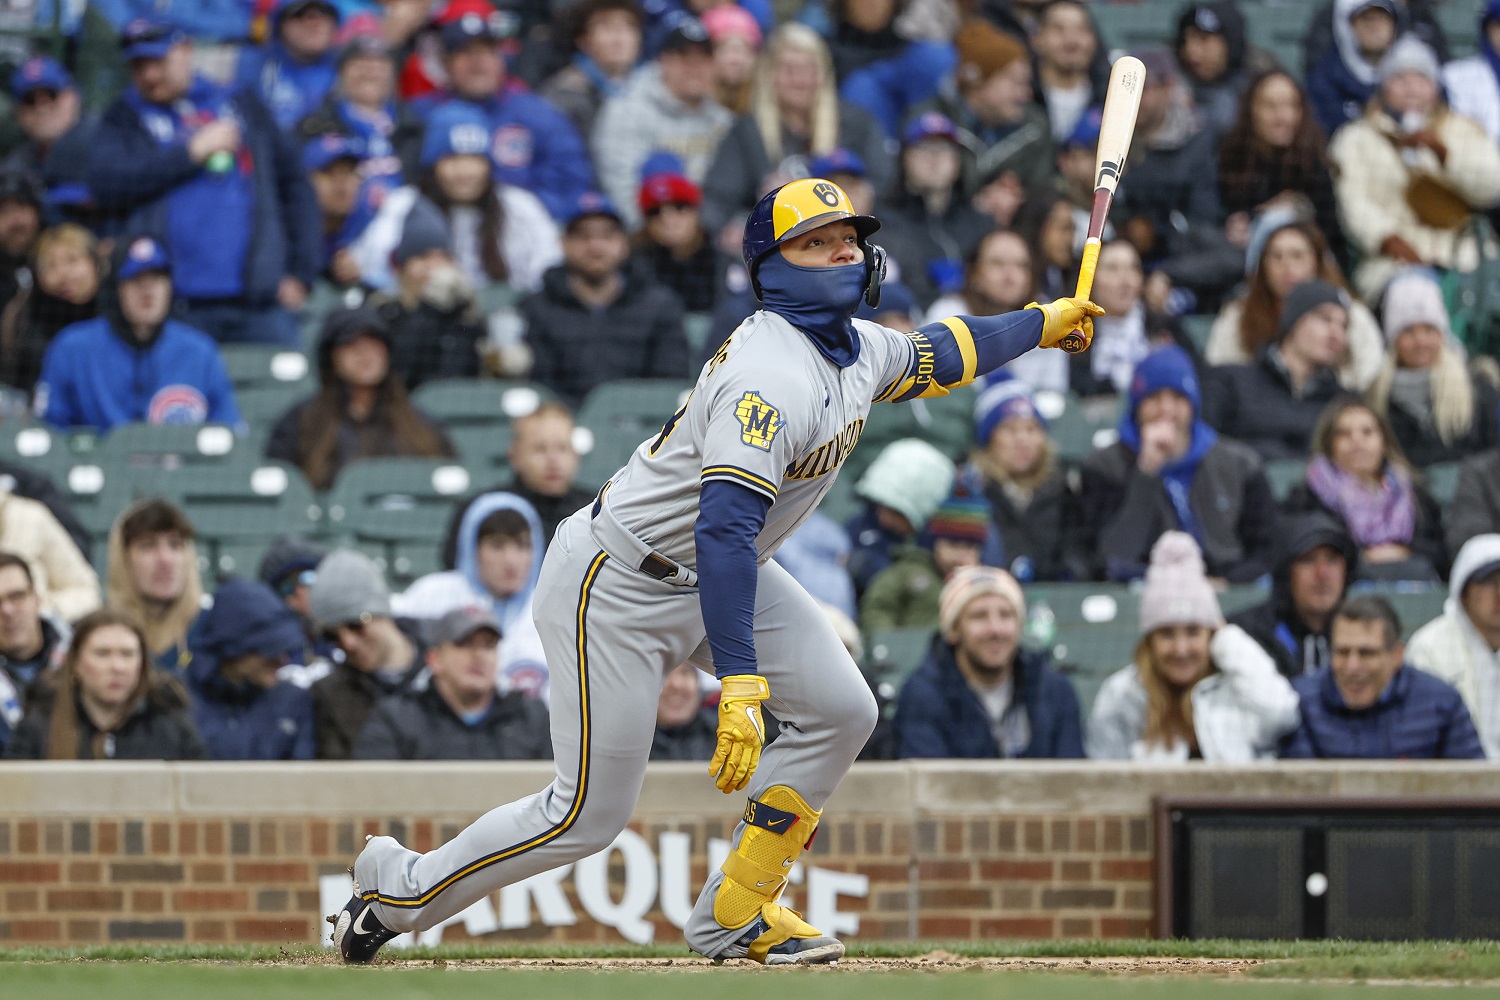 Late Contreras HR, leads Cubs past Brewers